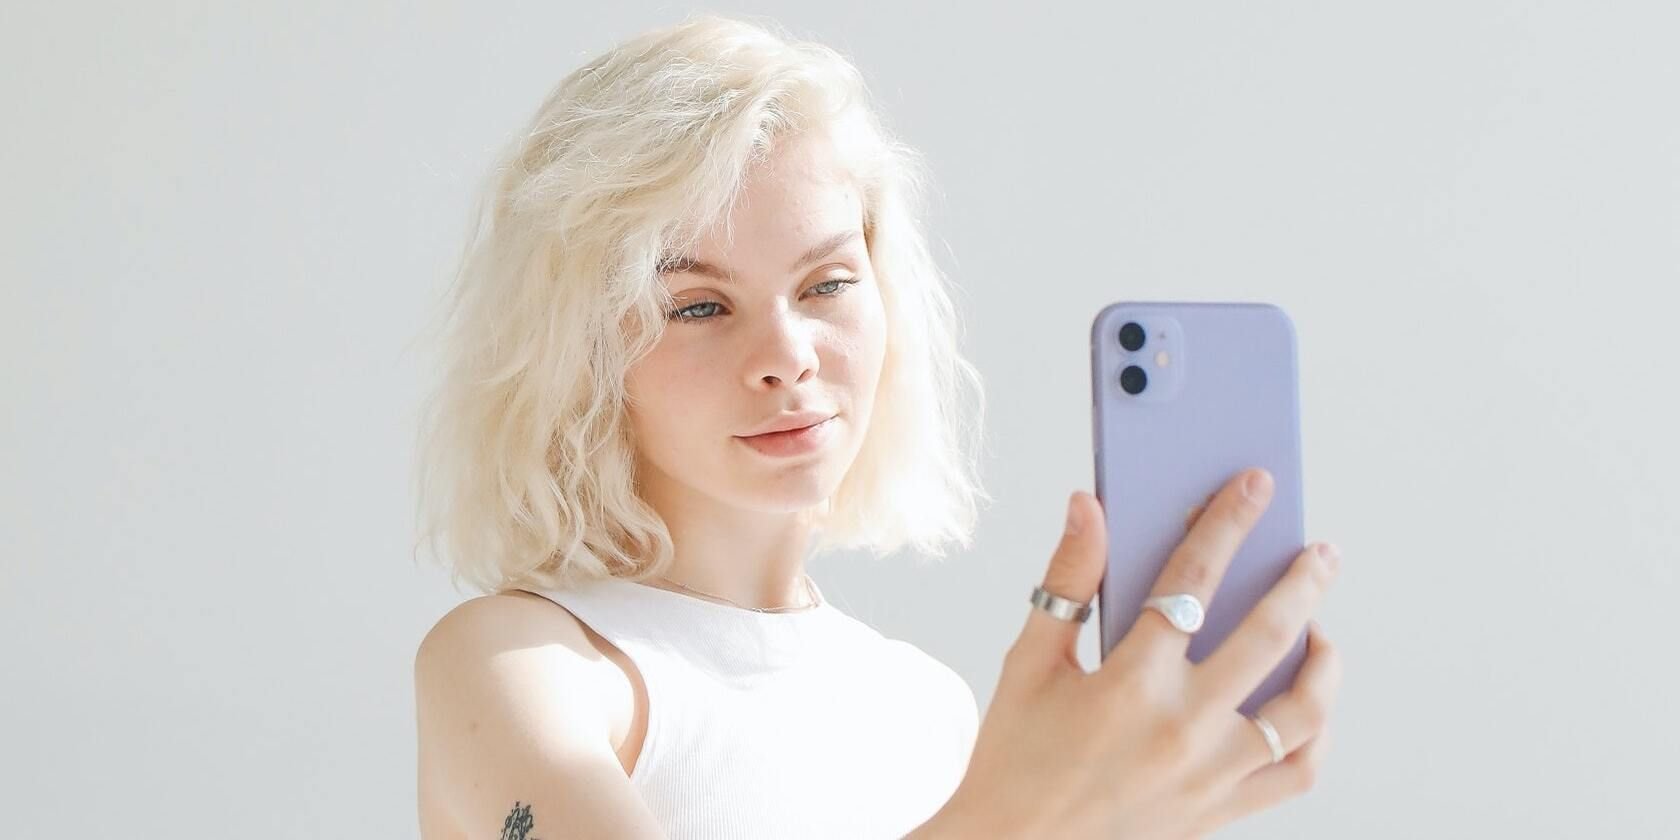 How to Stop iPhone Selfies From Flipping or Mirroring After You Take the Photo